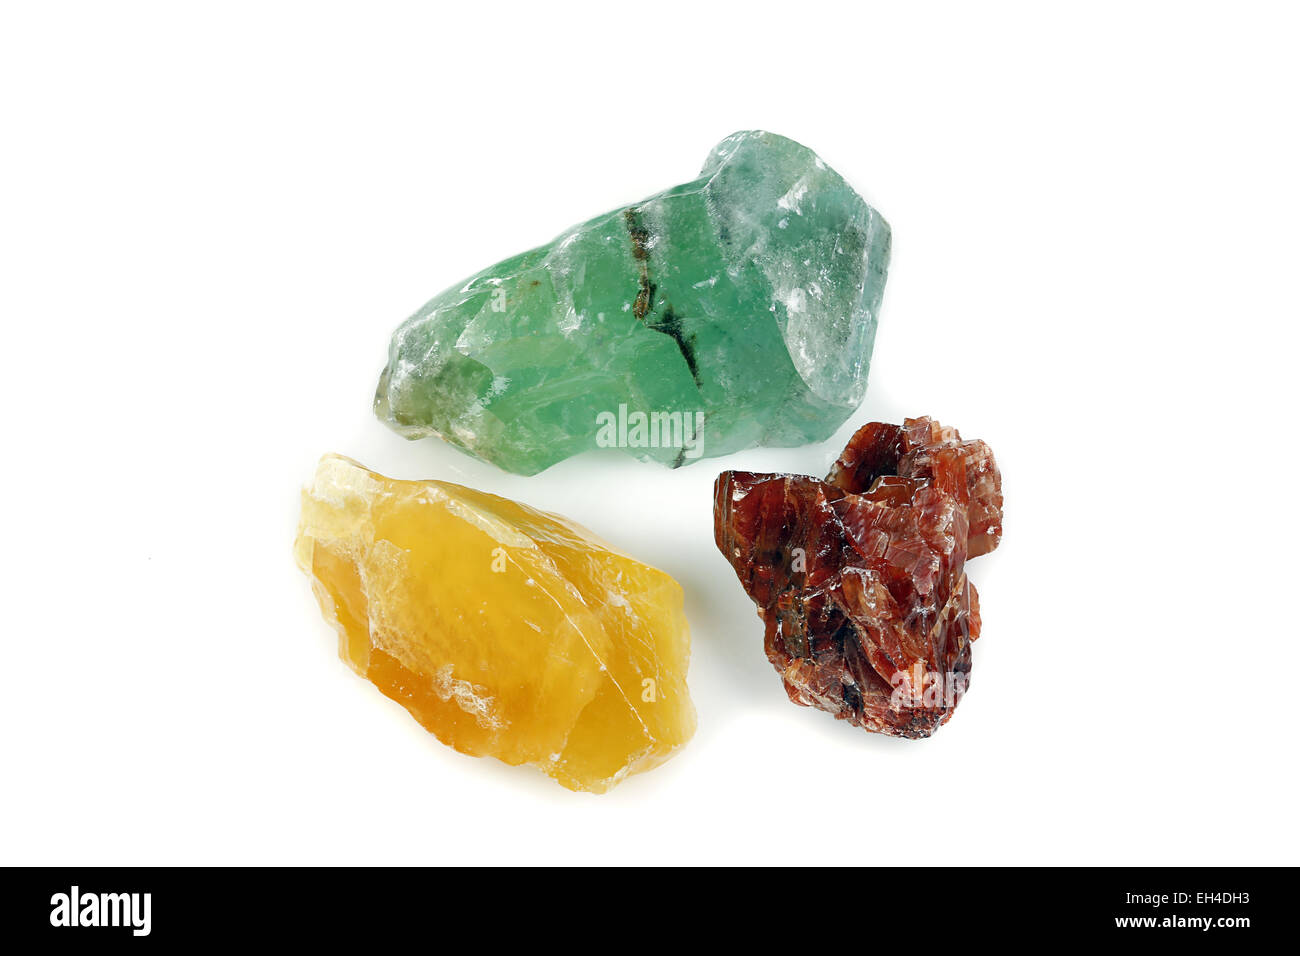 Yellow, Red and Green Calcite rock specimens, silo Stock Photo